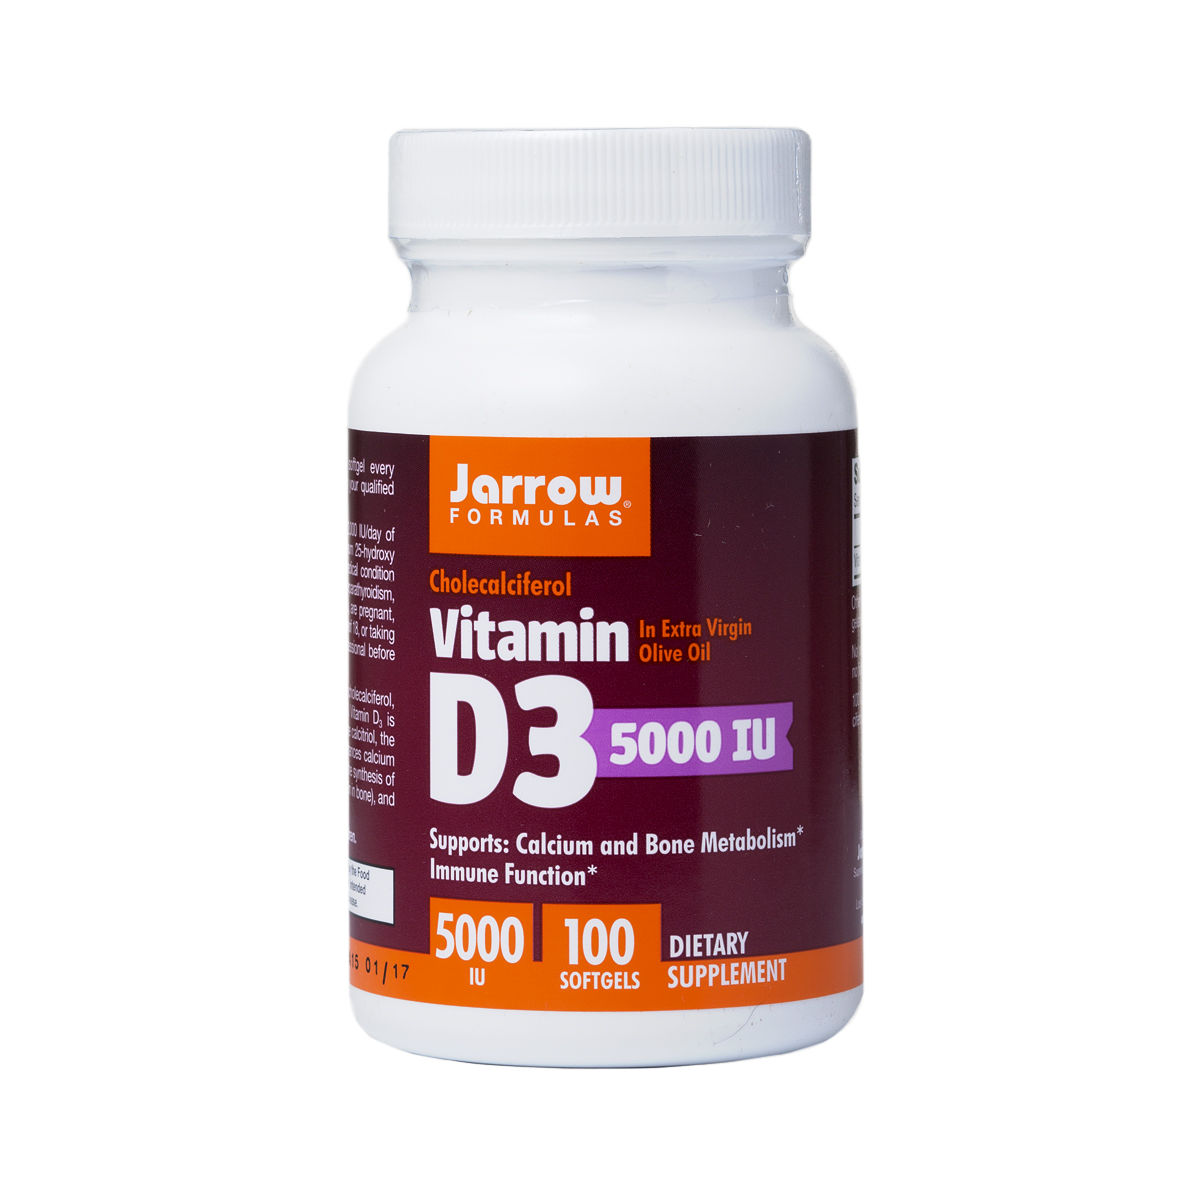 What are the best foods for prostate health supplements, vitamin d3 ...